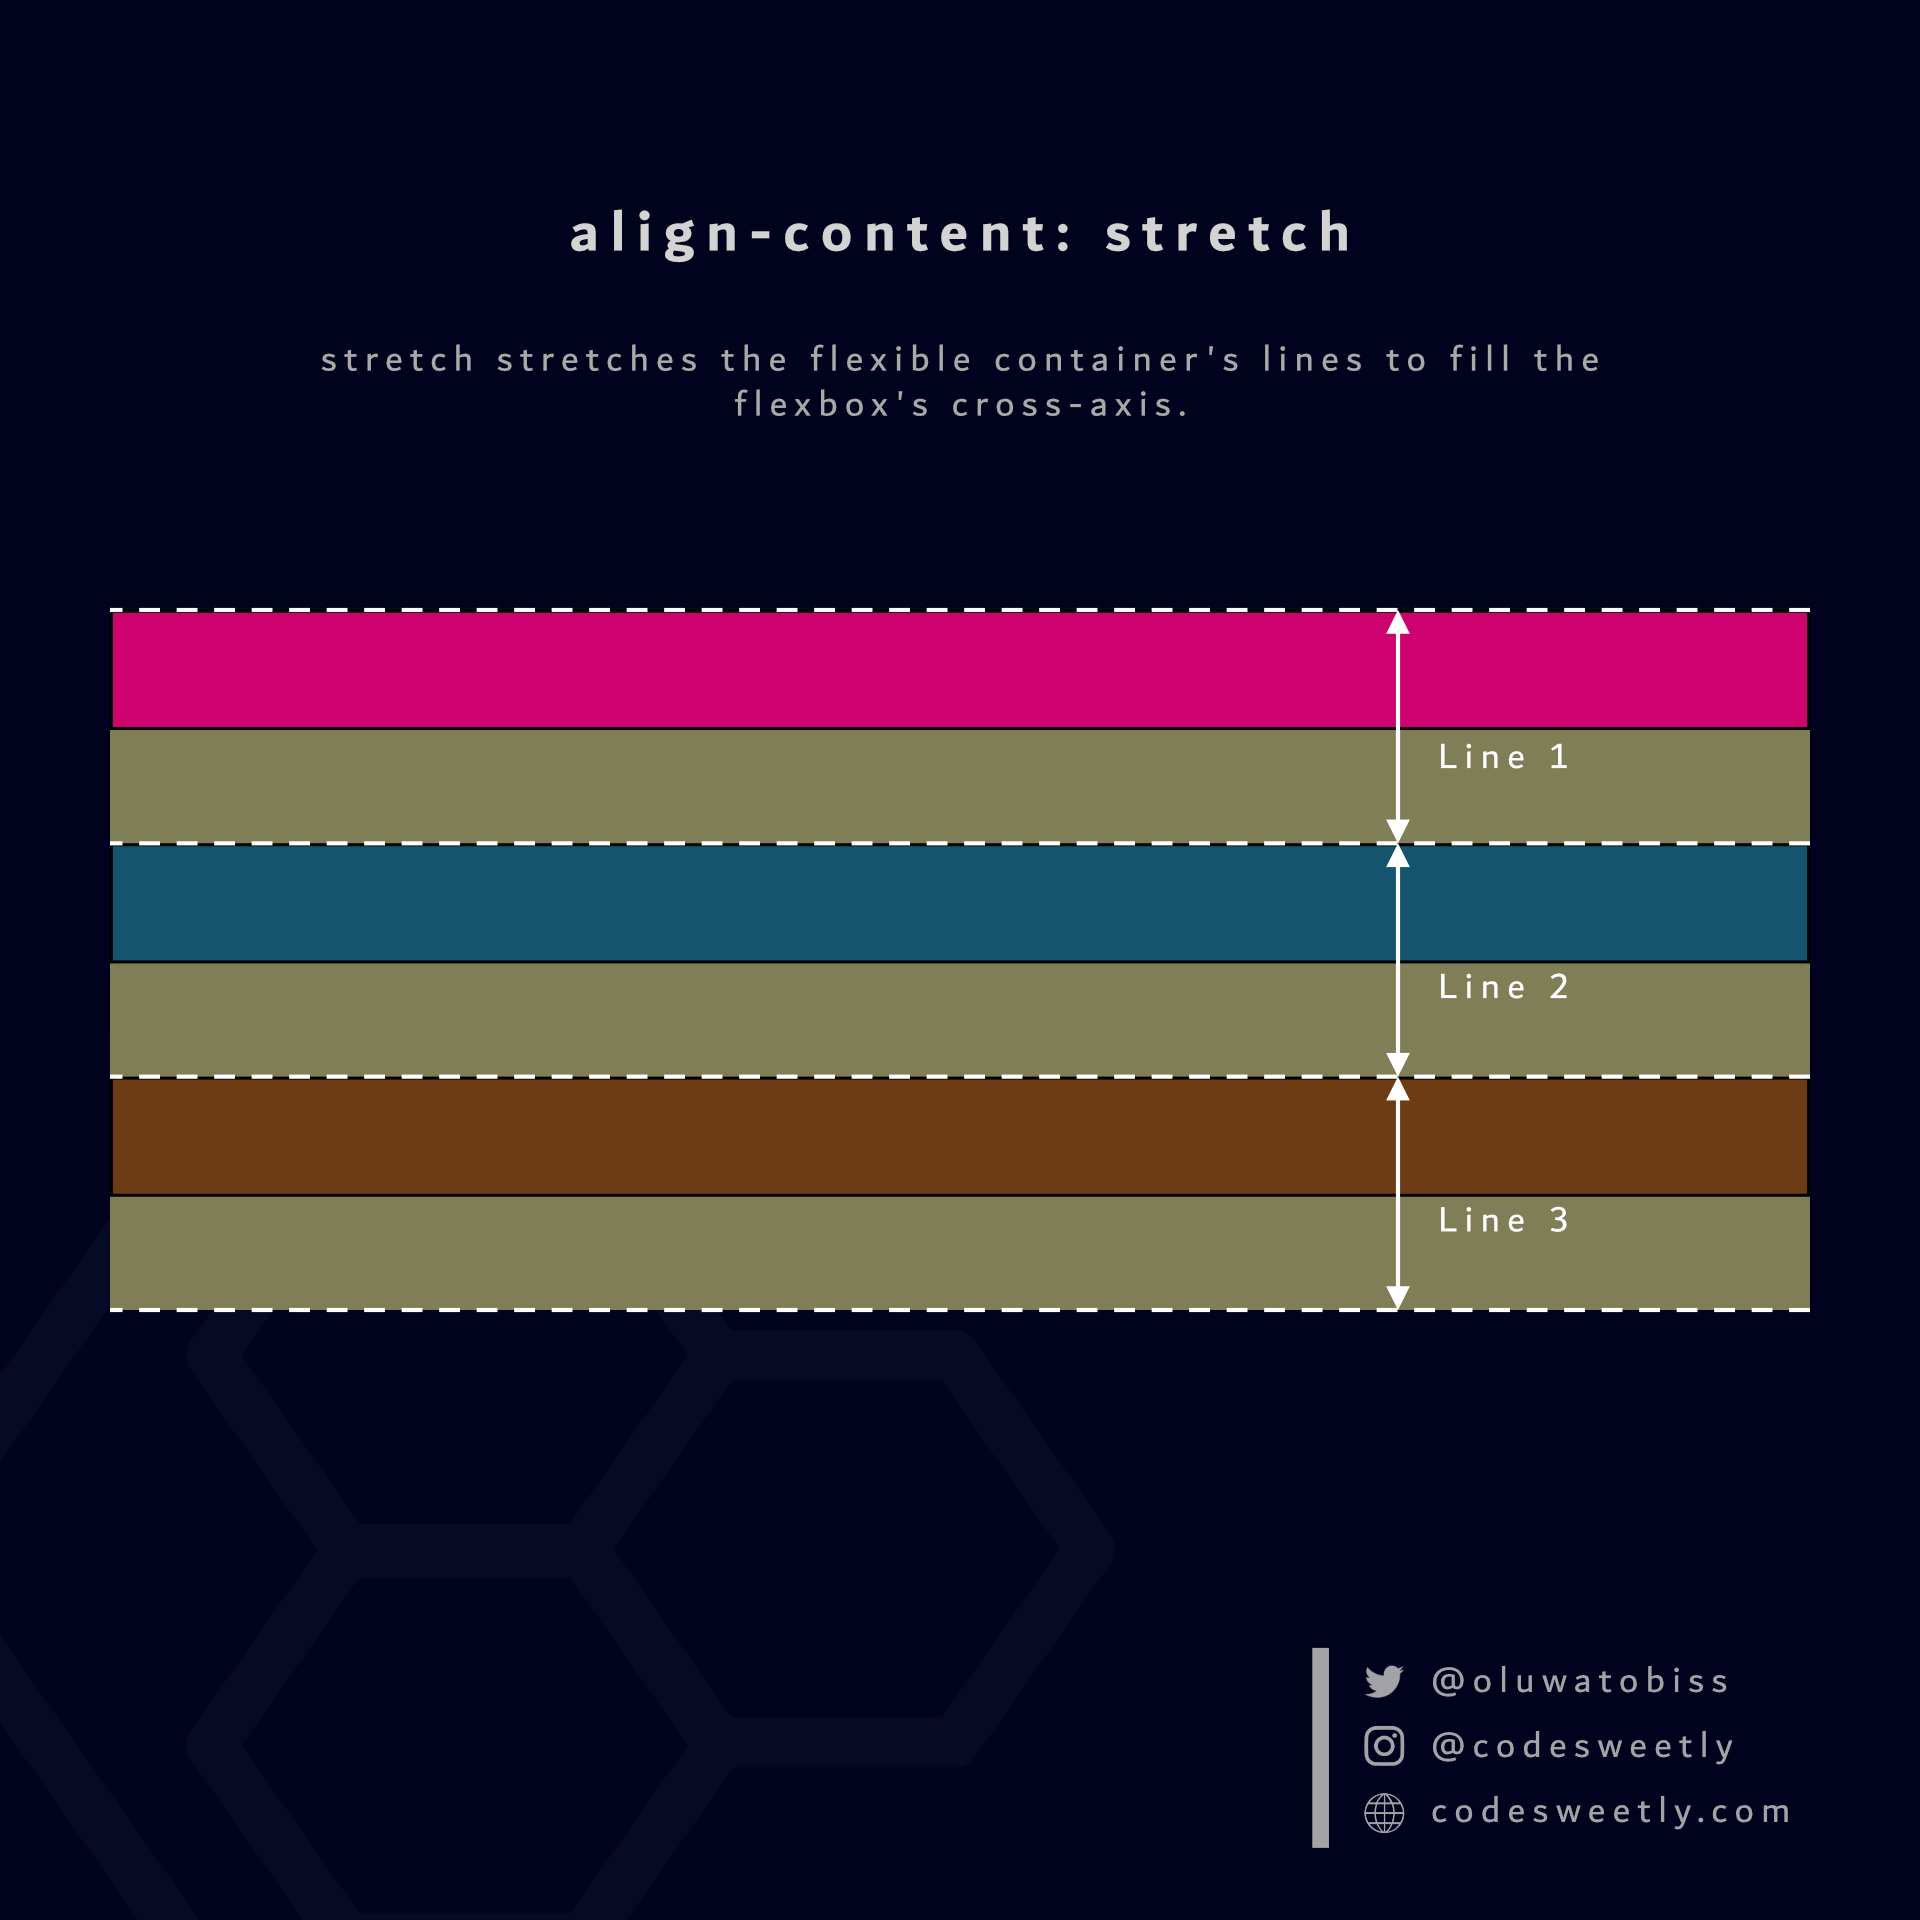 Illustration of align-content's stretch value